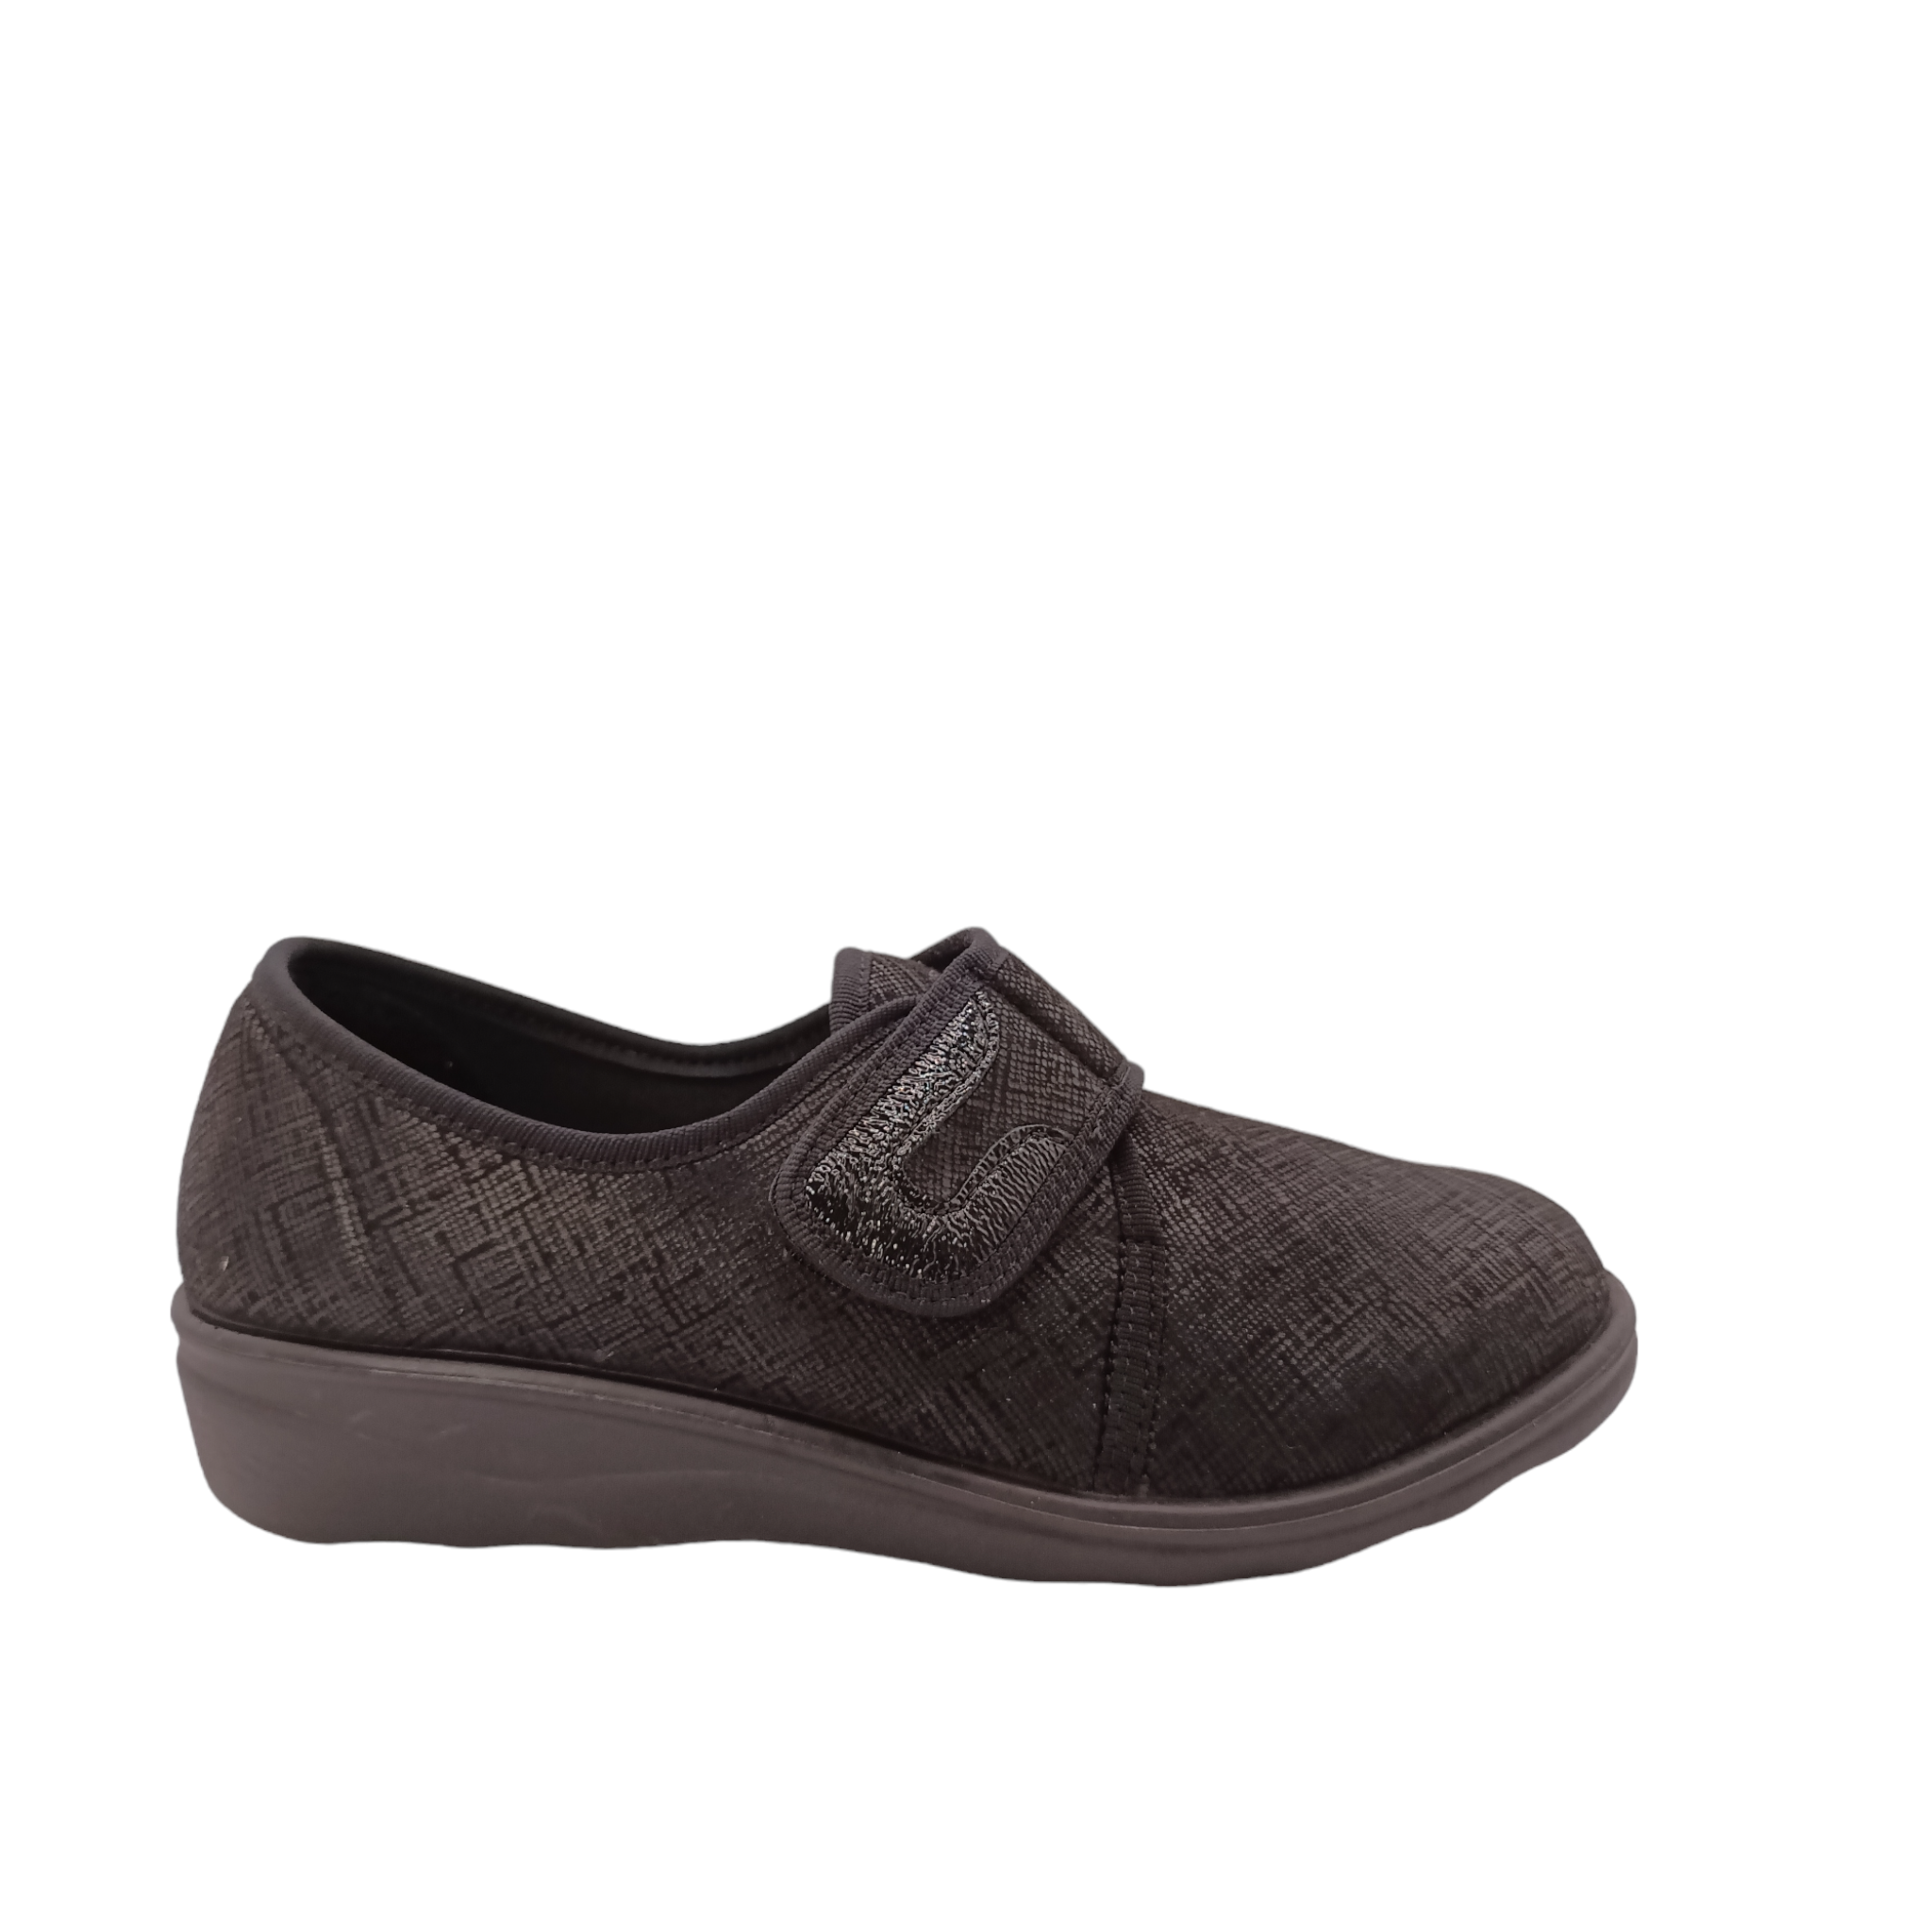 Shop Nice Josef Seibel - with shoe&me - from Josef Seibel - Slippers - Slipper, Winter, Womens - [collection]